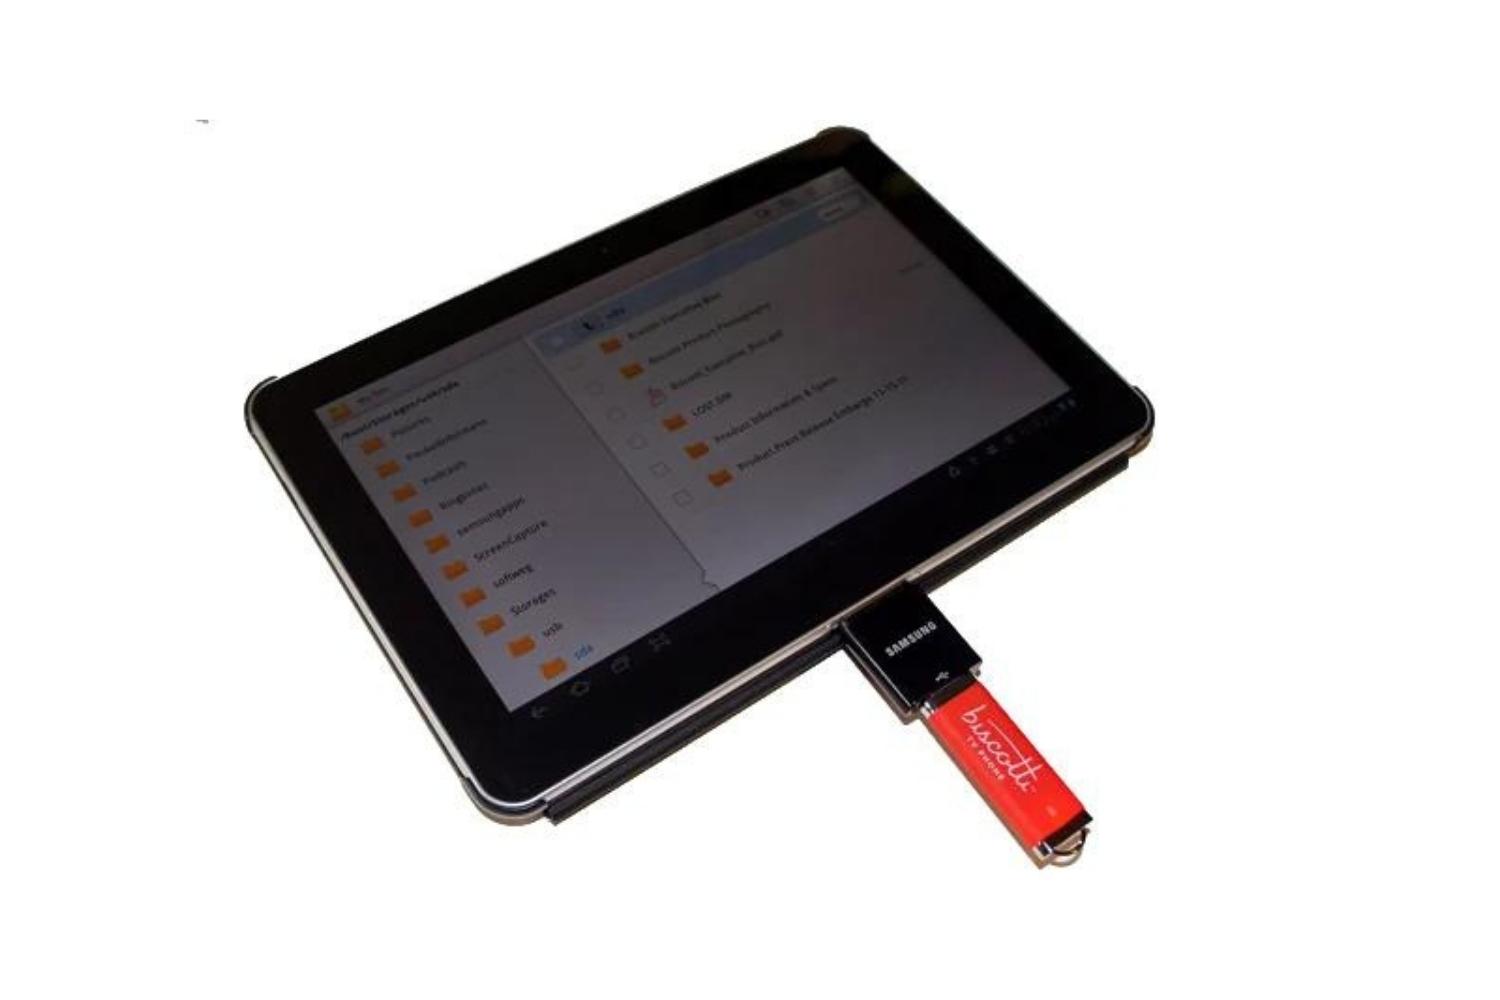 How To Transfer Files From USB To Tablet